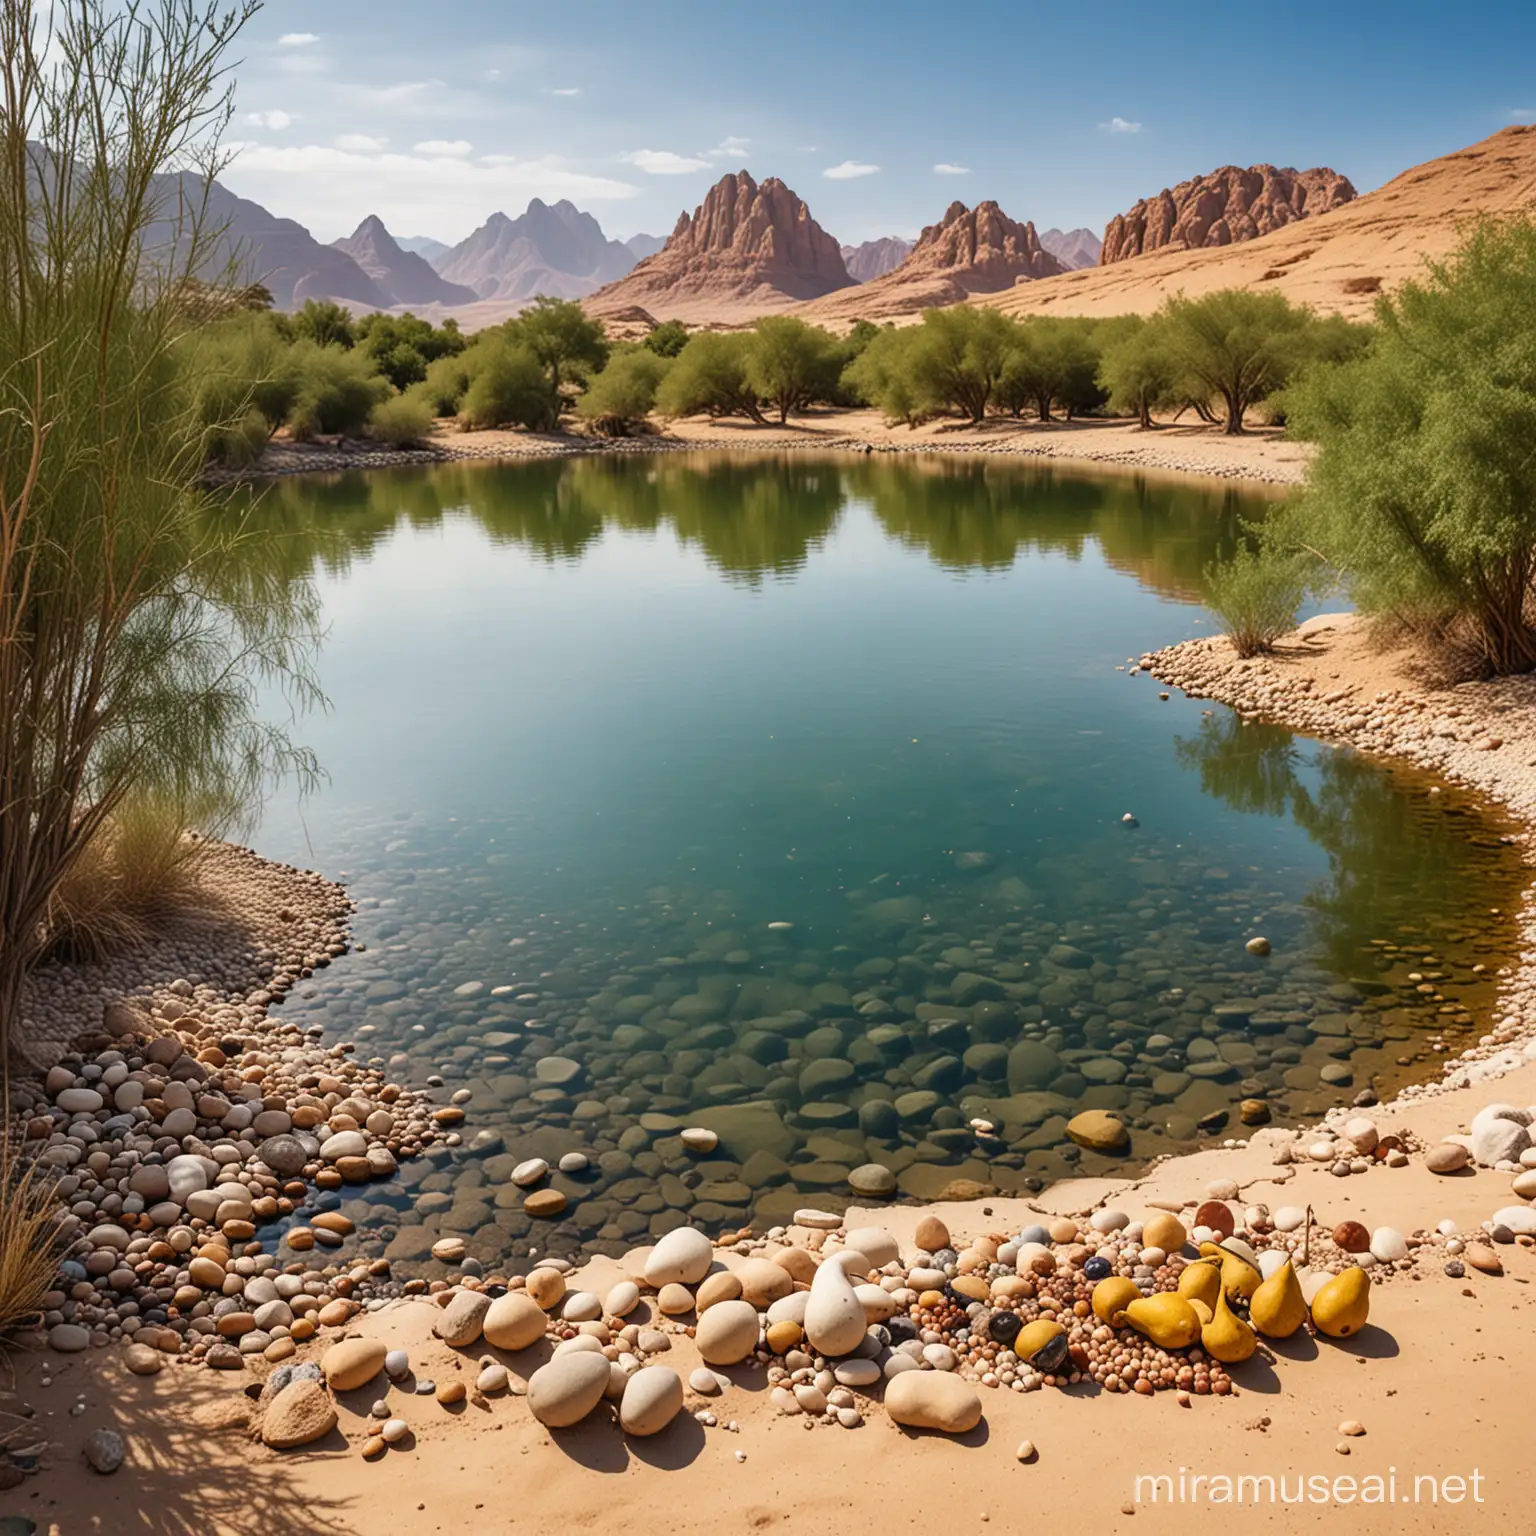 desert oasis with beautiful lake, clams and pears of wisdom, ancient monks collecting pearls and gemstones on the edge of the water